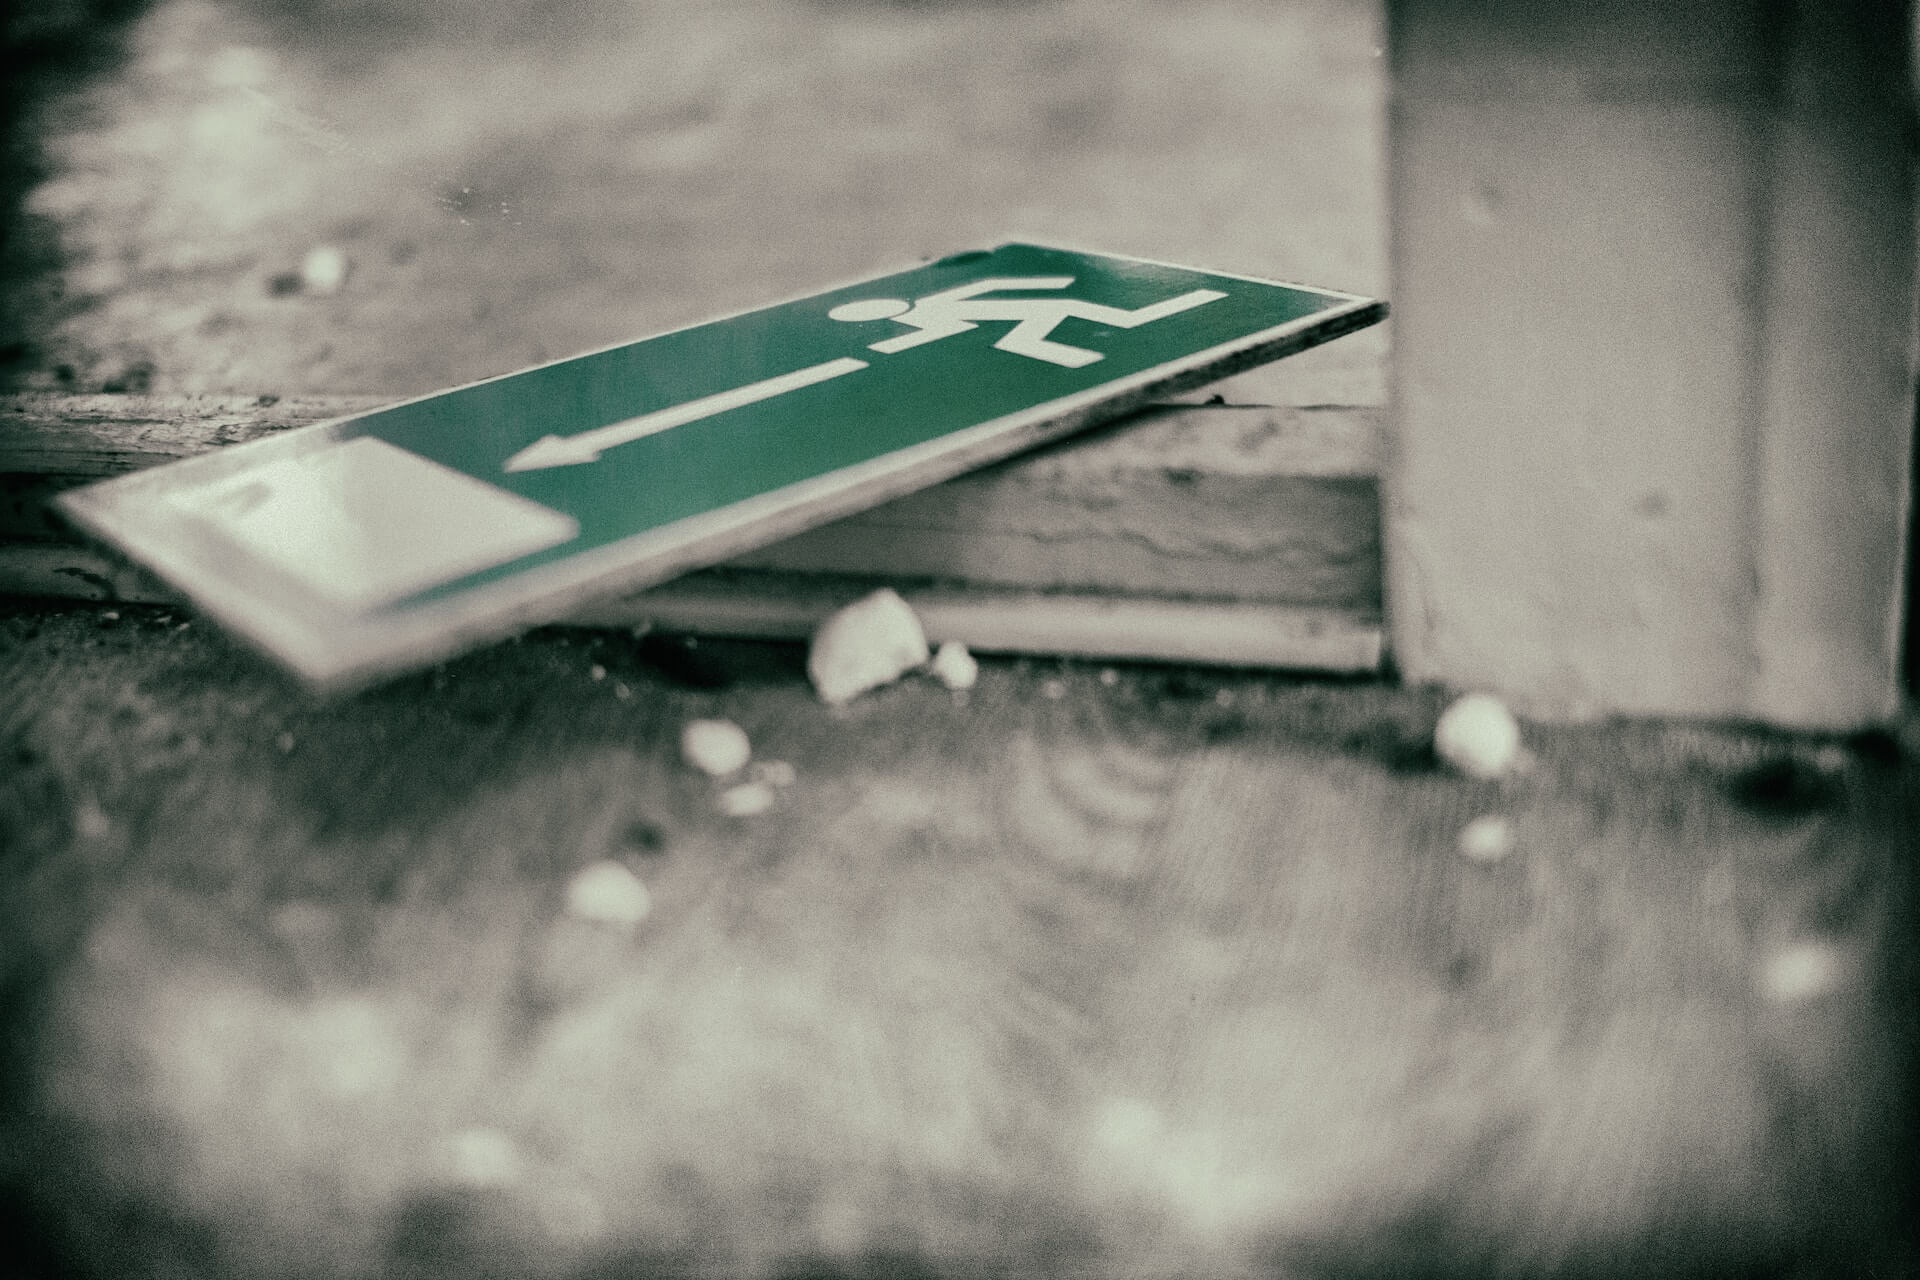 A fire exit sign on the floor